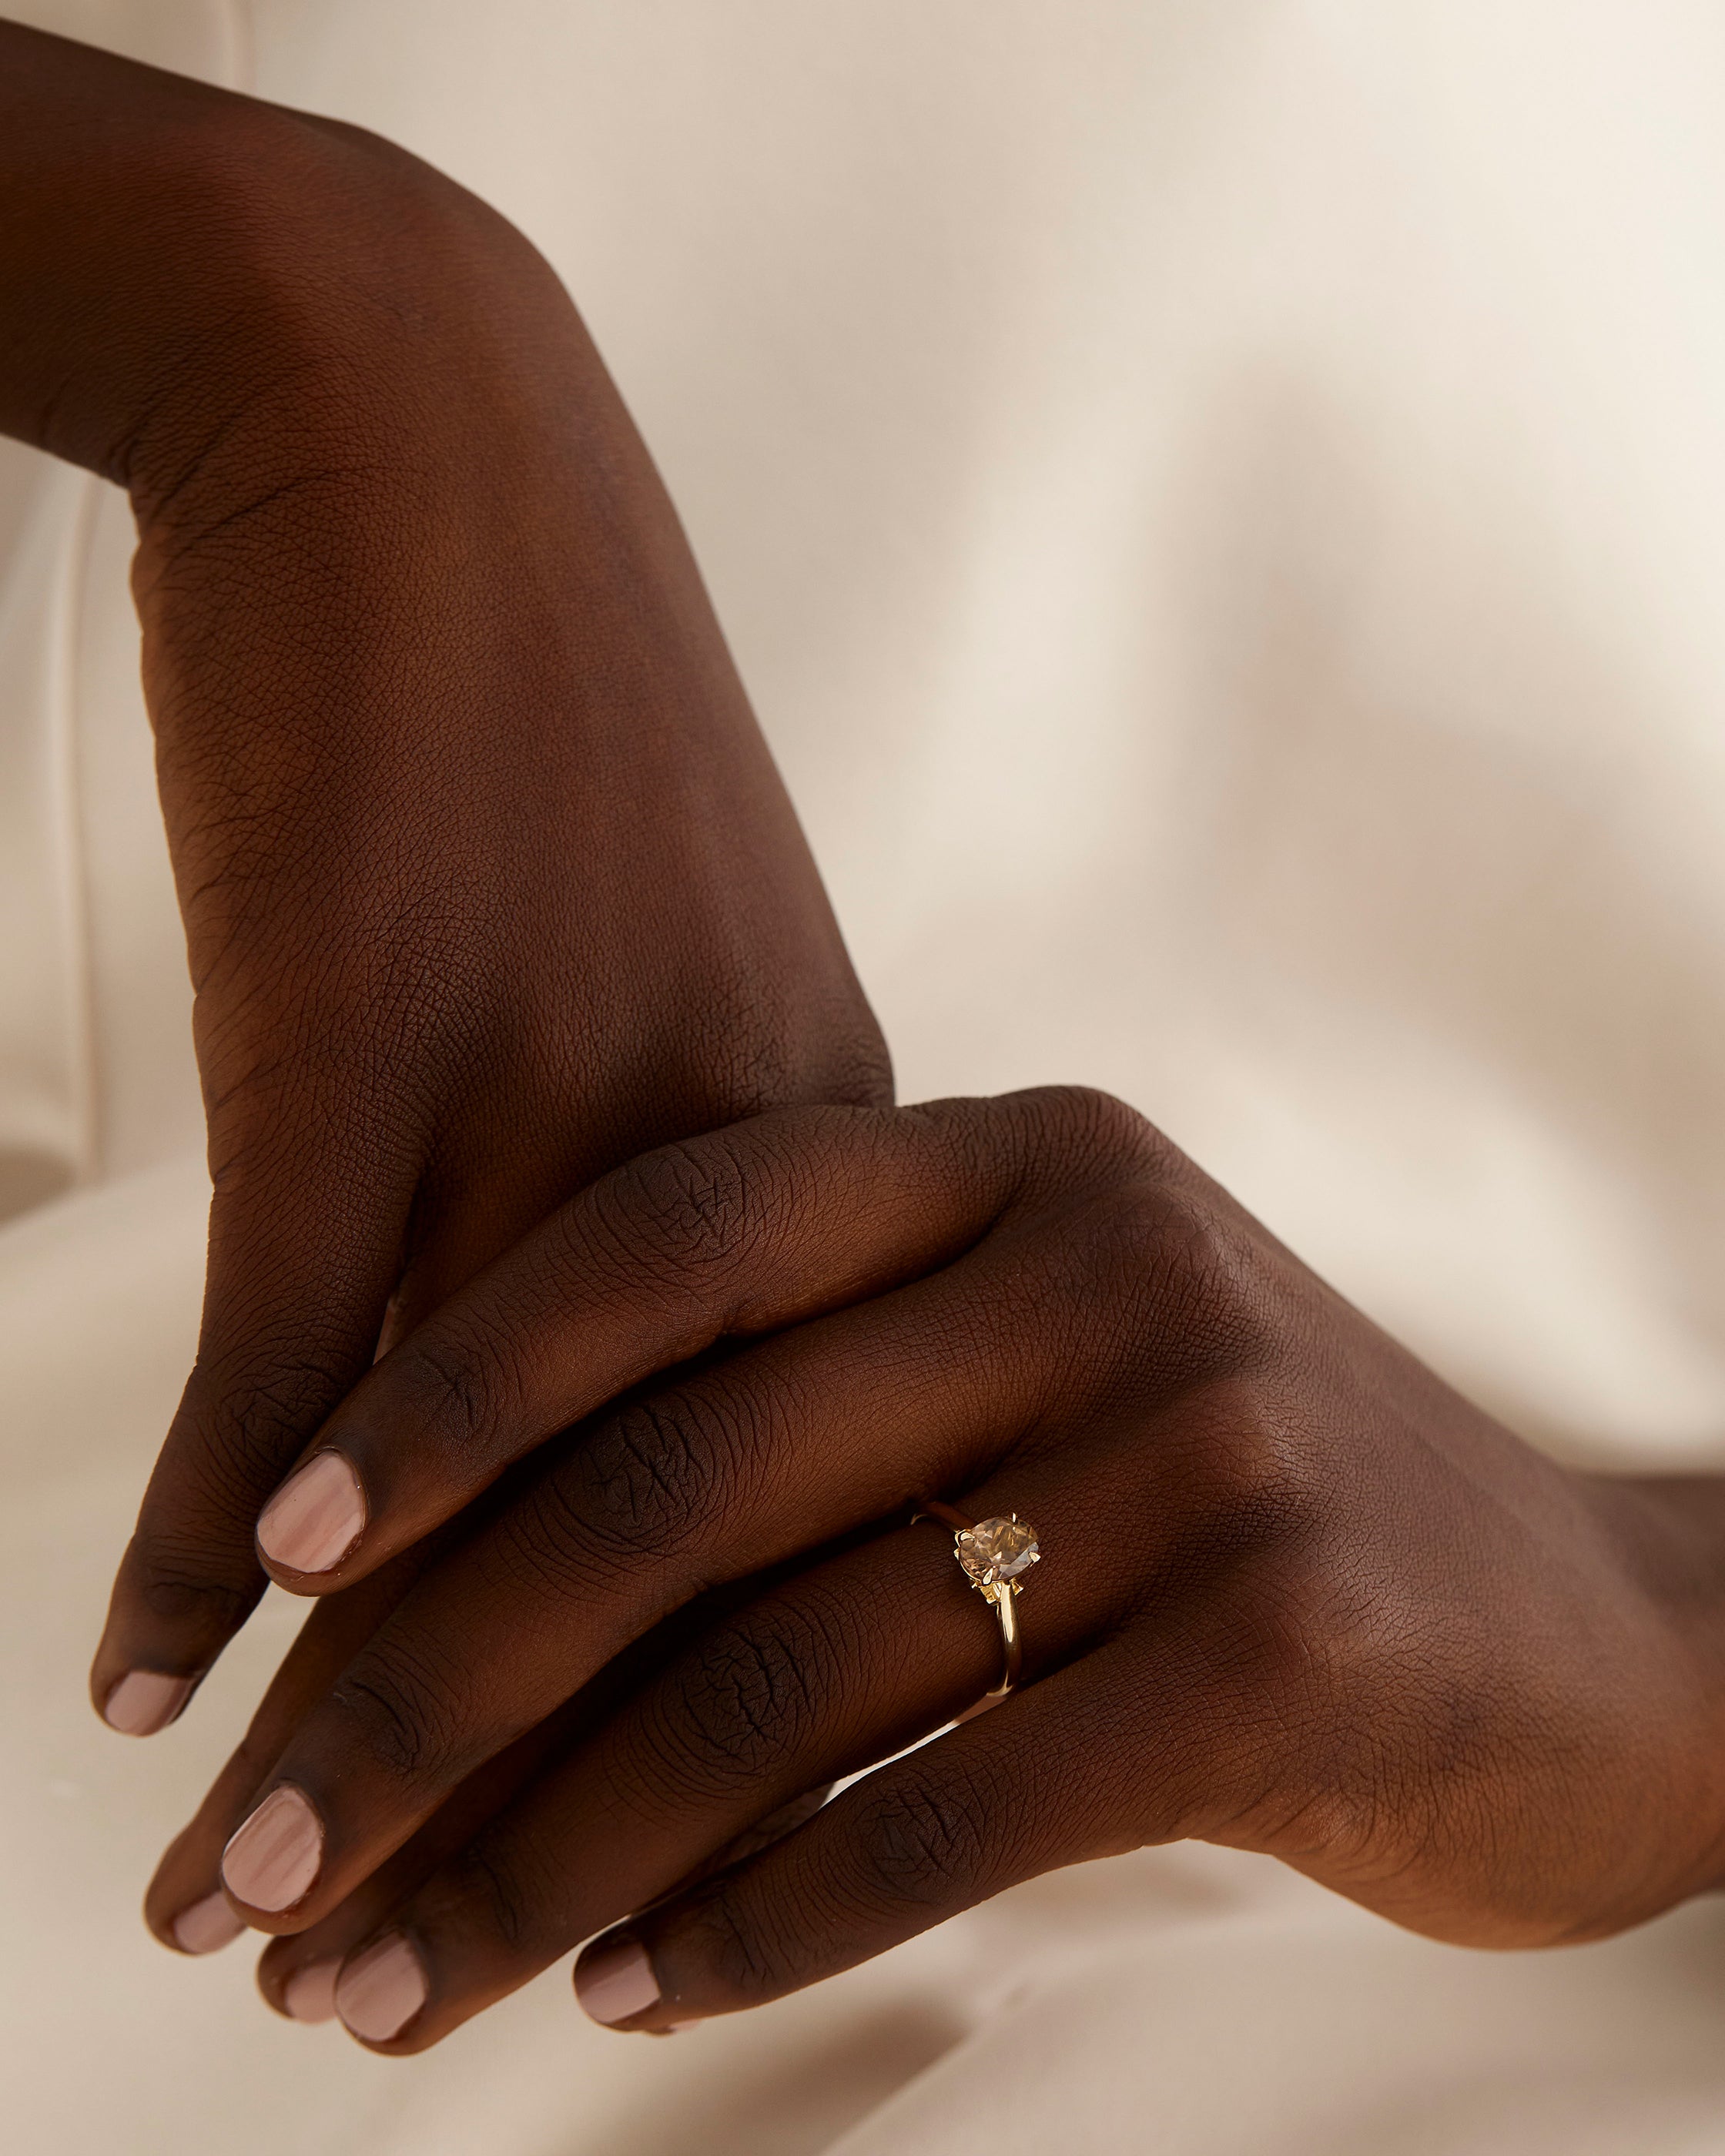 A model wears a oval solitaire with a smokey quartz and diamond details in the setting